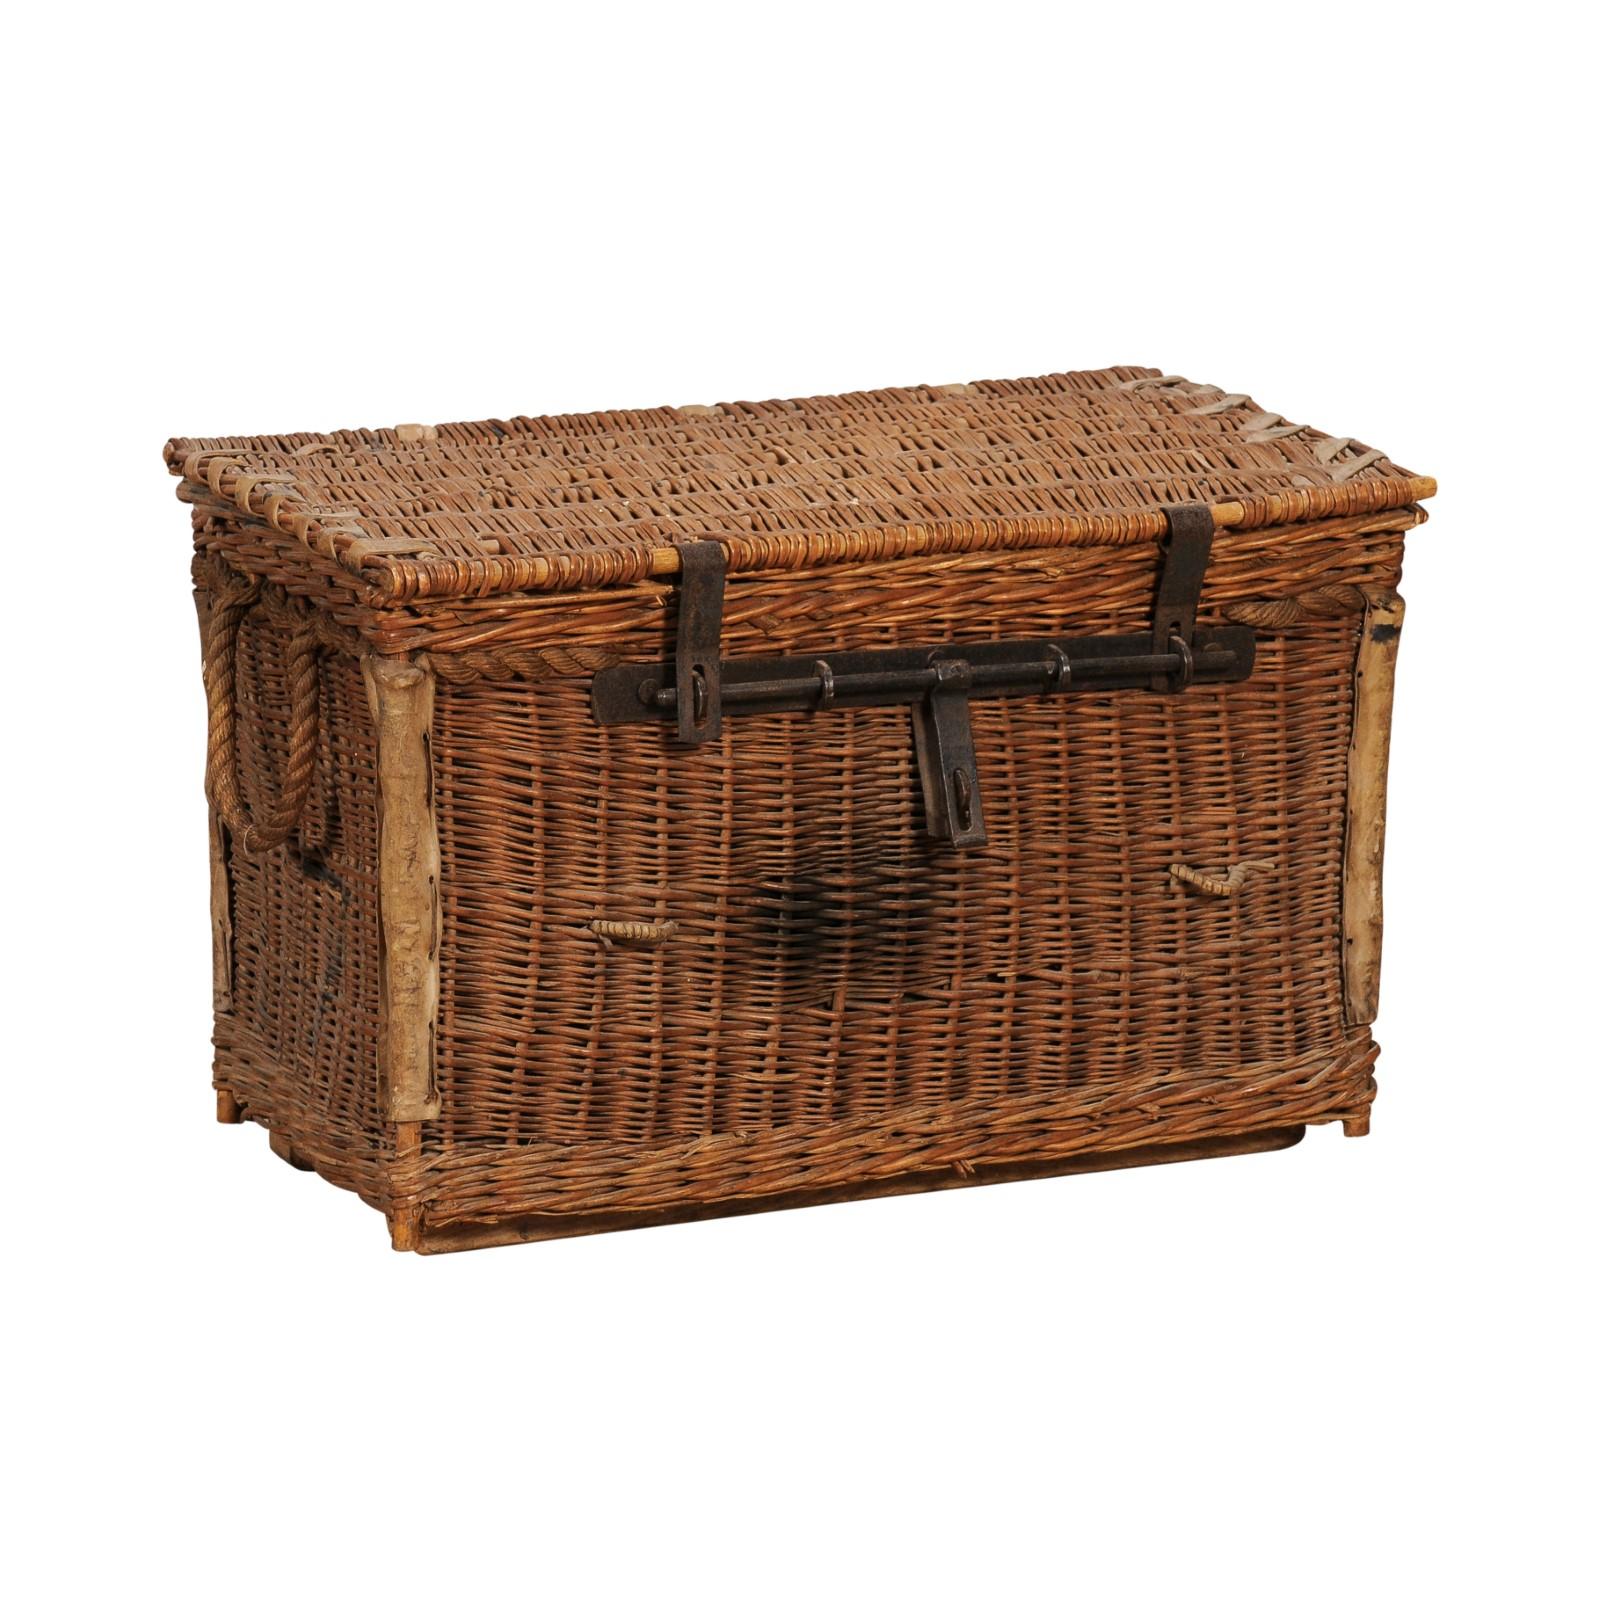 English Rustic 1930s Wicker Trunk with Iron Hardware and Lateral Handles For Sale 8